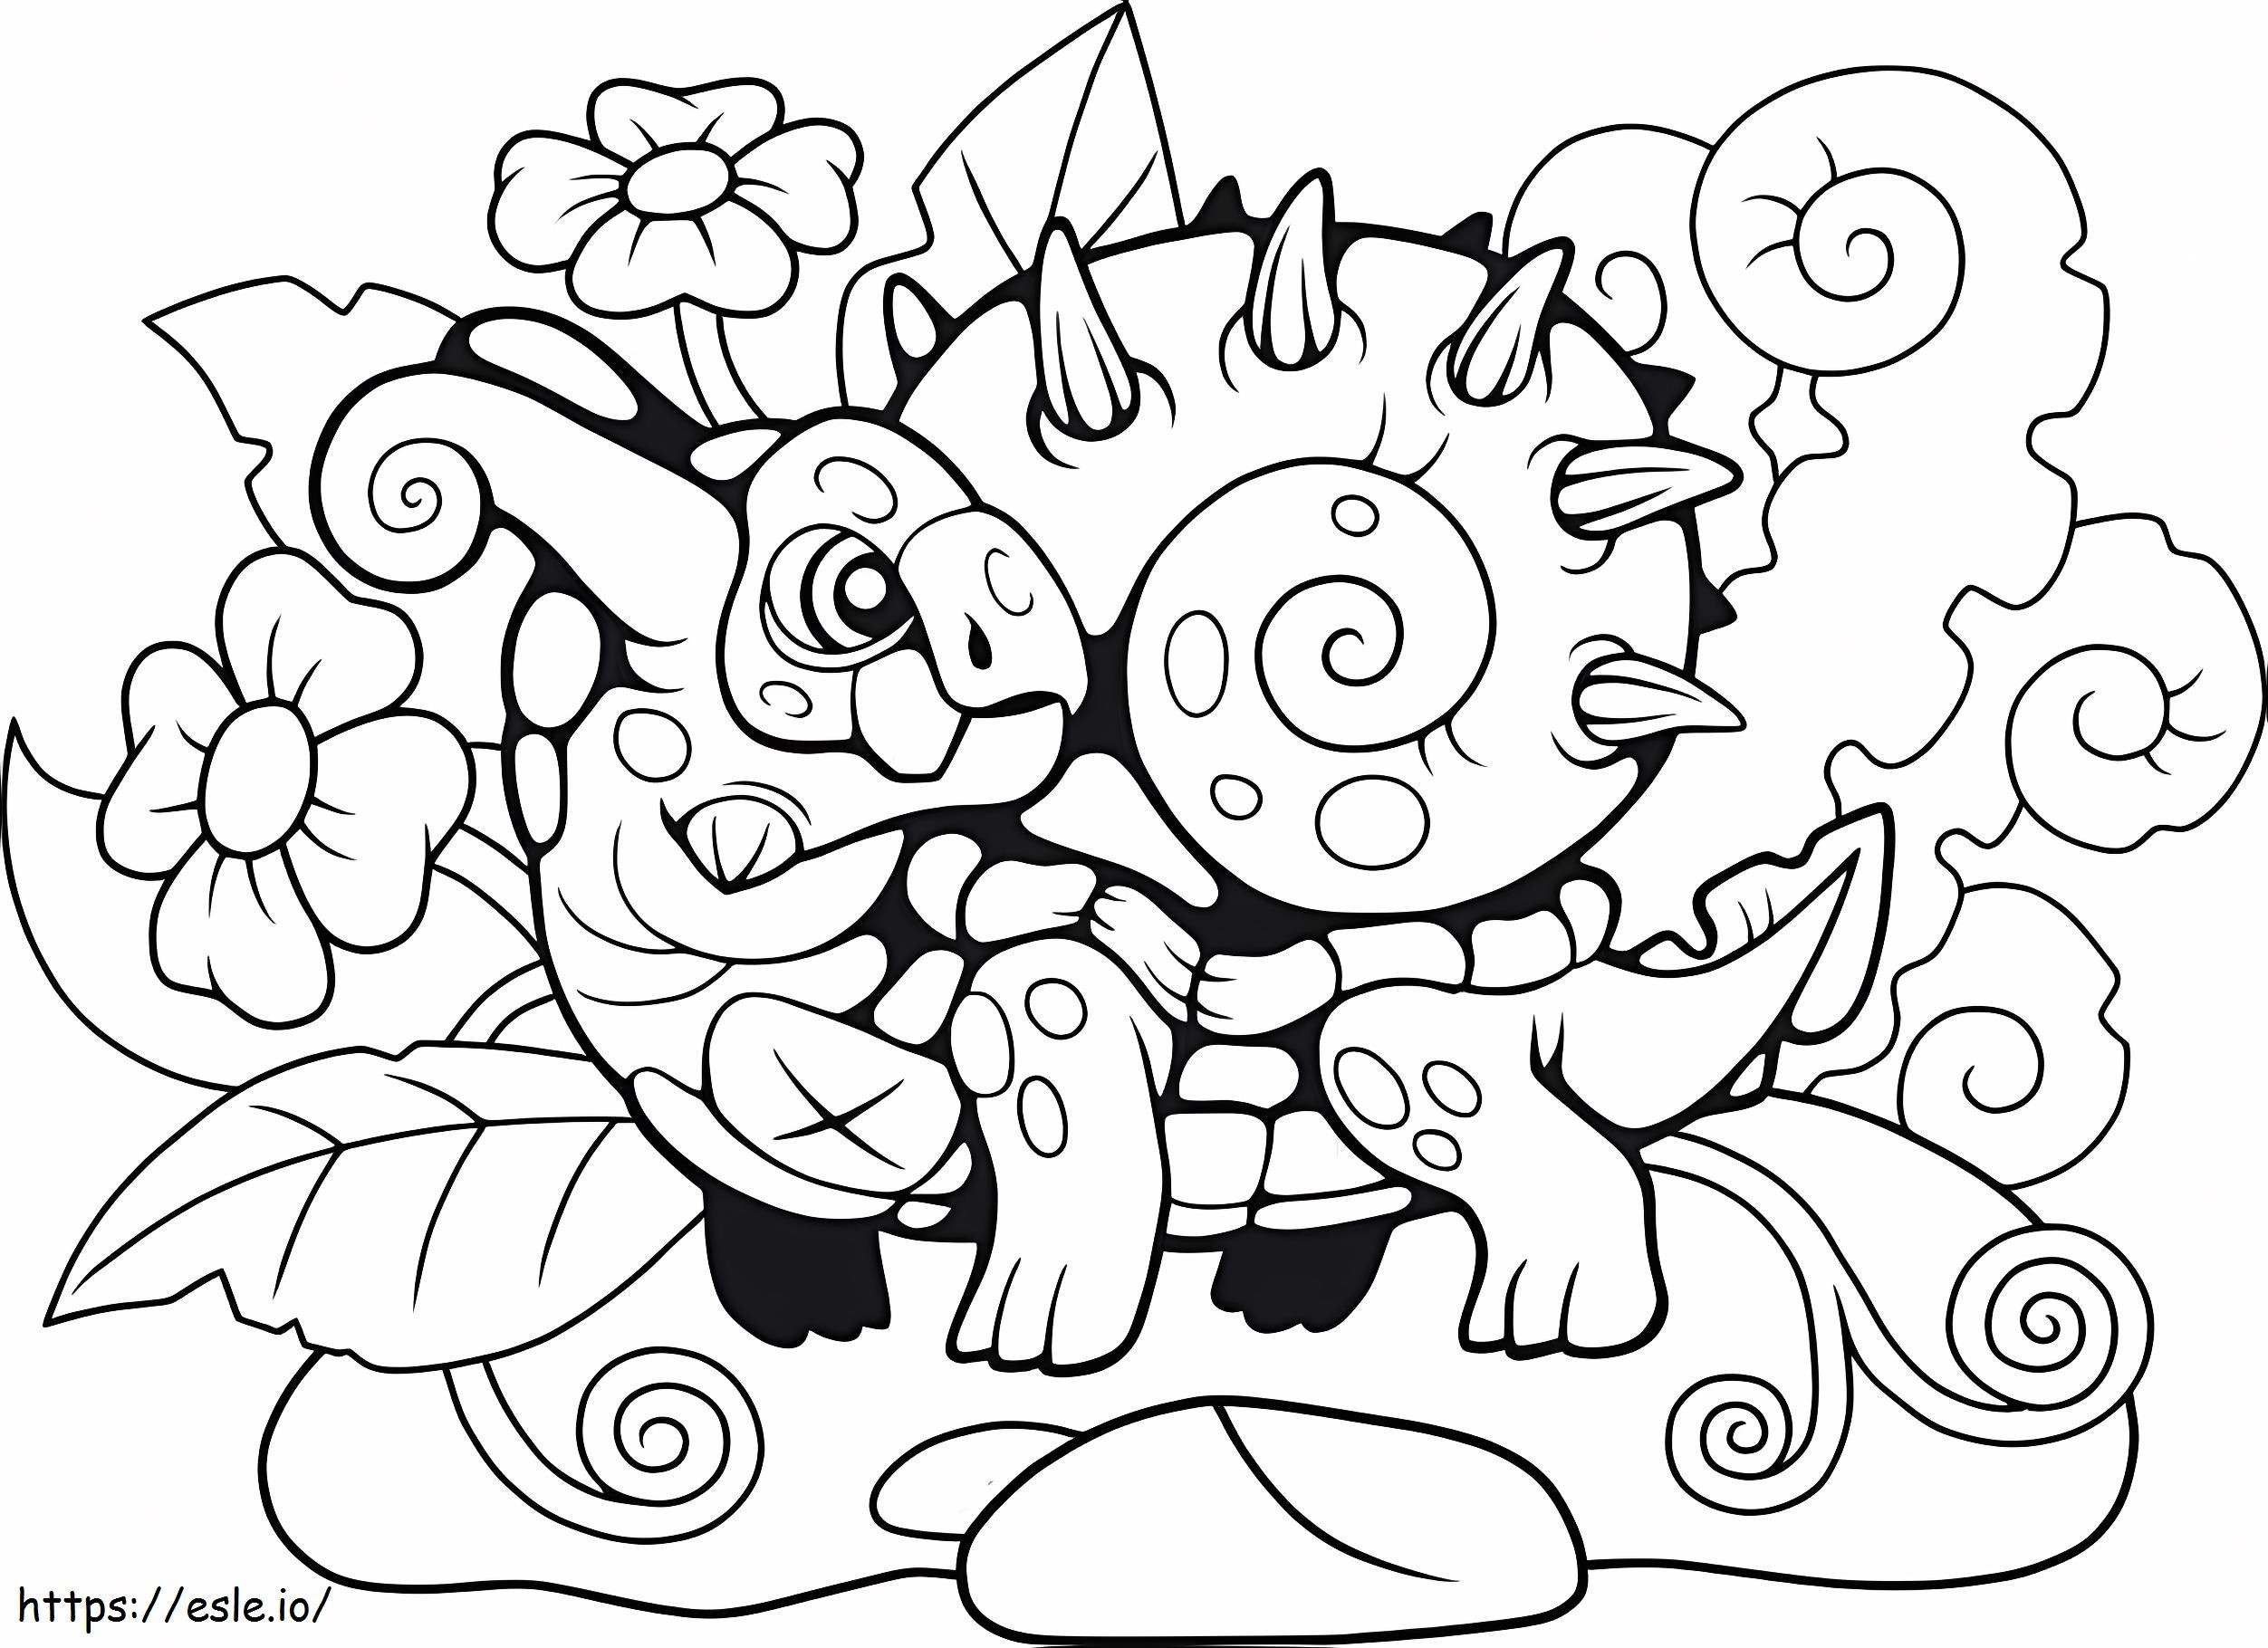 Monster Snail coloring page